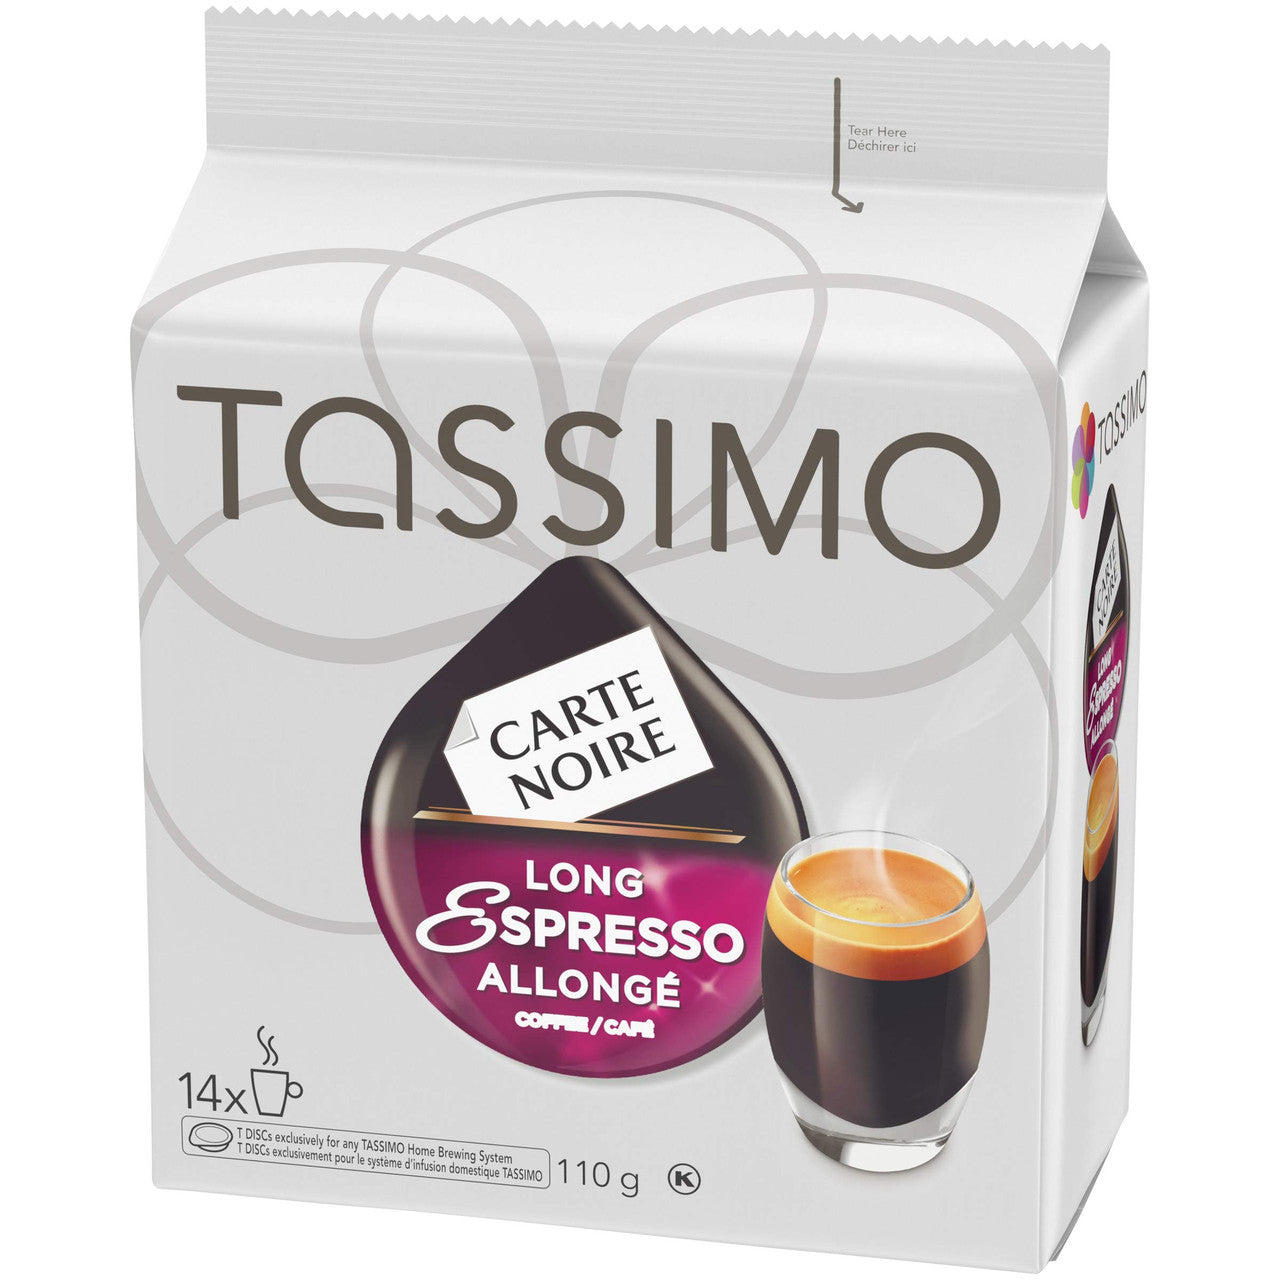 Tassimo Carte Noire Long Espresso, 70 T-Discs (5 Boxes of 14 T-Discs) {Imported from Canada}